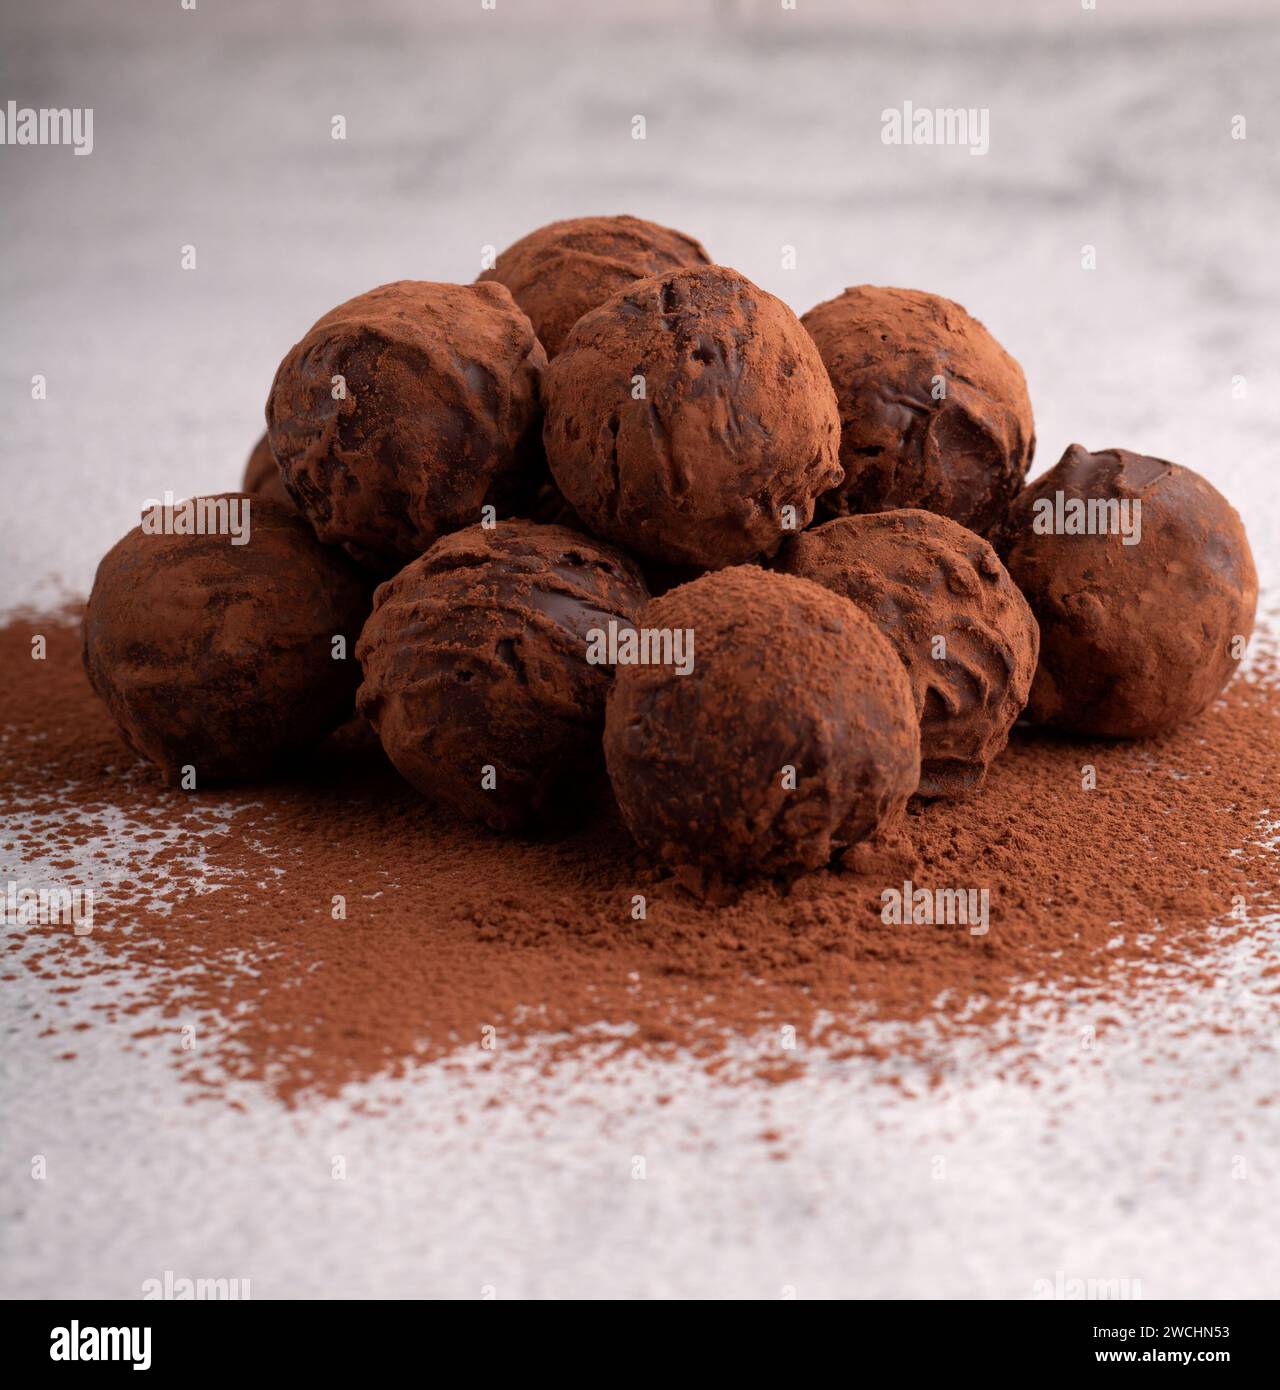 photo homemade dark chocolate truffles, a sweet and energy-packed dessert. of cocoa-coated treats, promising a rich and satisfying flavor experience. Stock Photo